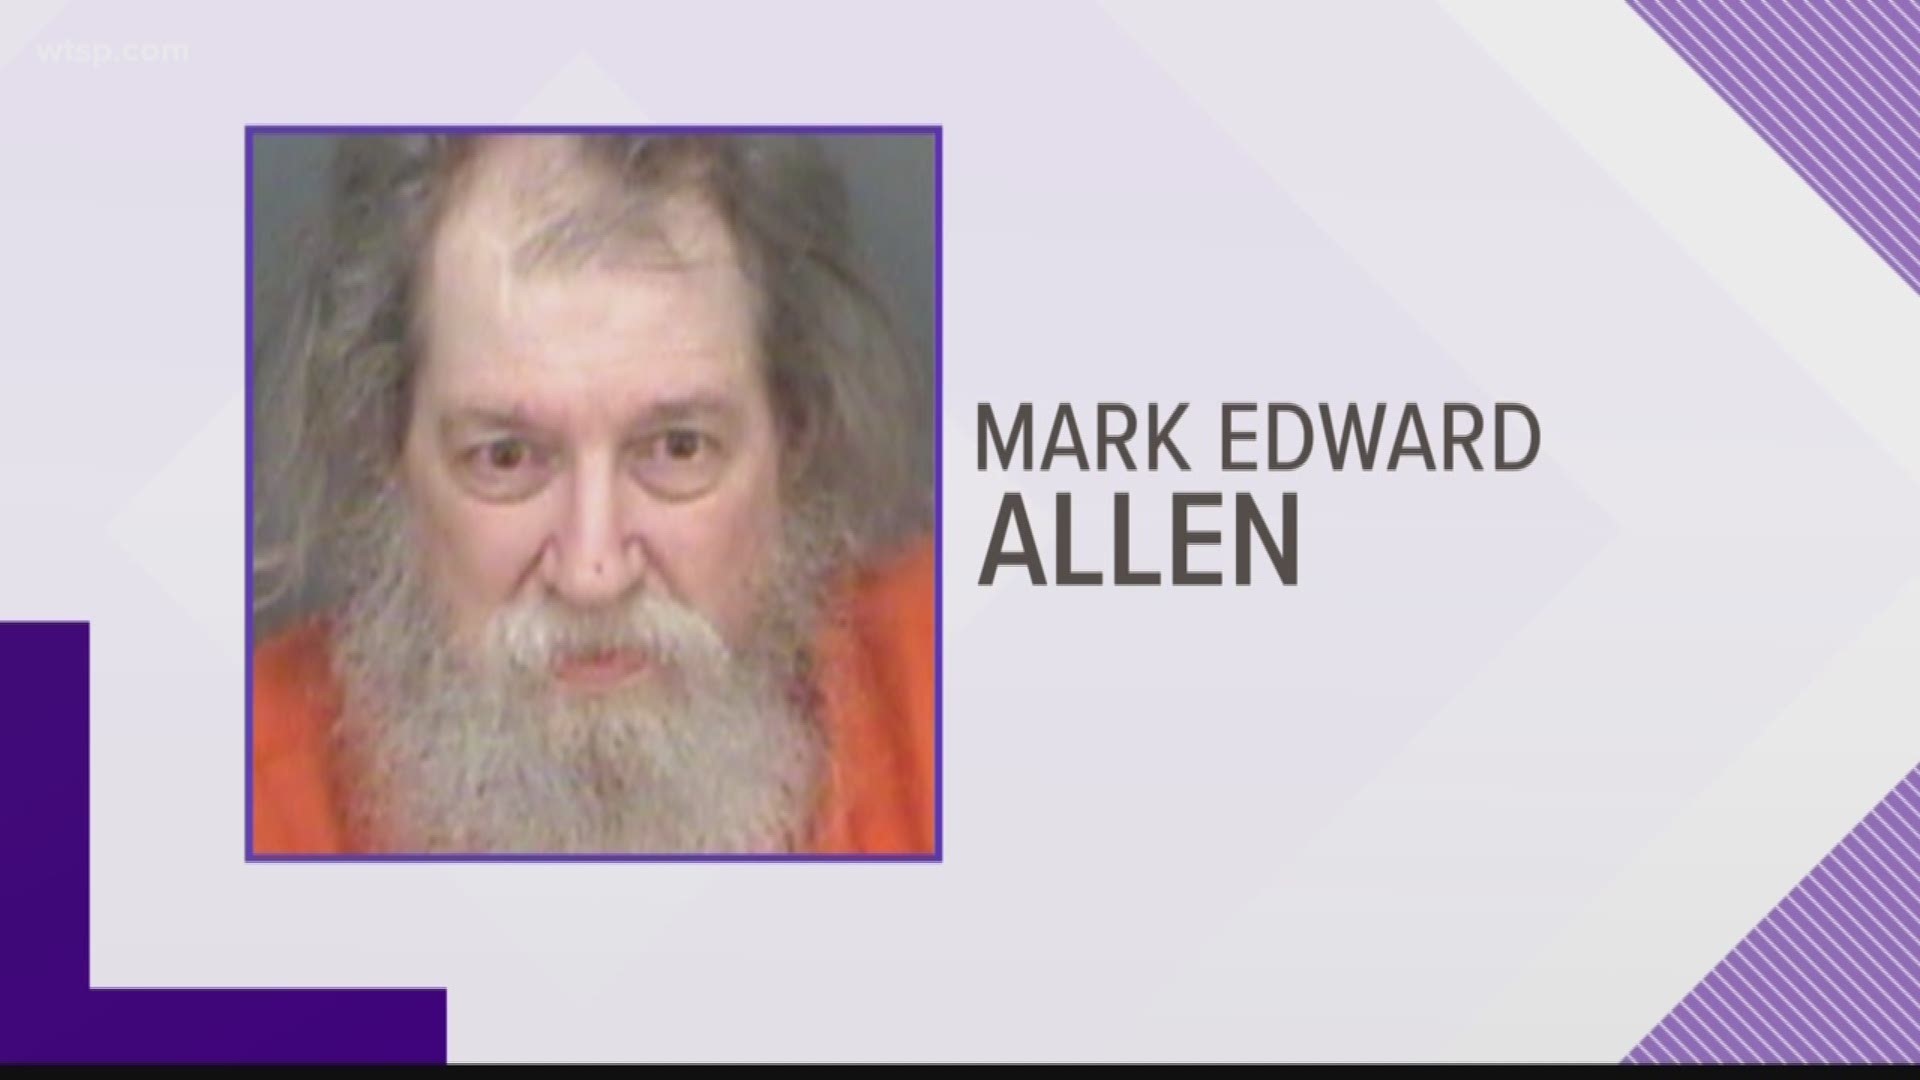 Last week, law enforcement found a suspicious object inside a gate entrance at the Bay Pines VA Healthcare System.

On Wednesday, authorities announced the arrest of a St. Petersburg man accused of placing an explosive device at the veterans hospital.

Mark Edward Allen, 60, is charged with possession of unregistered explosive devices.